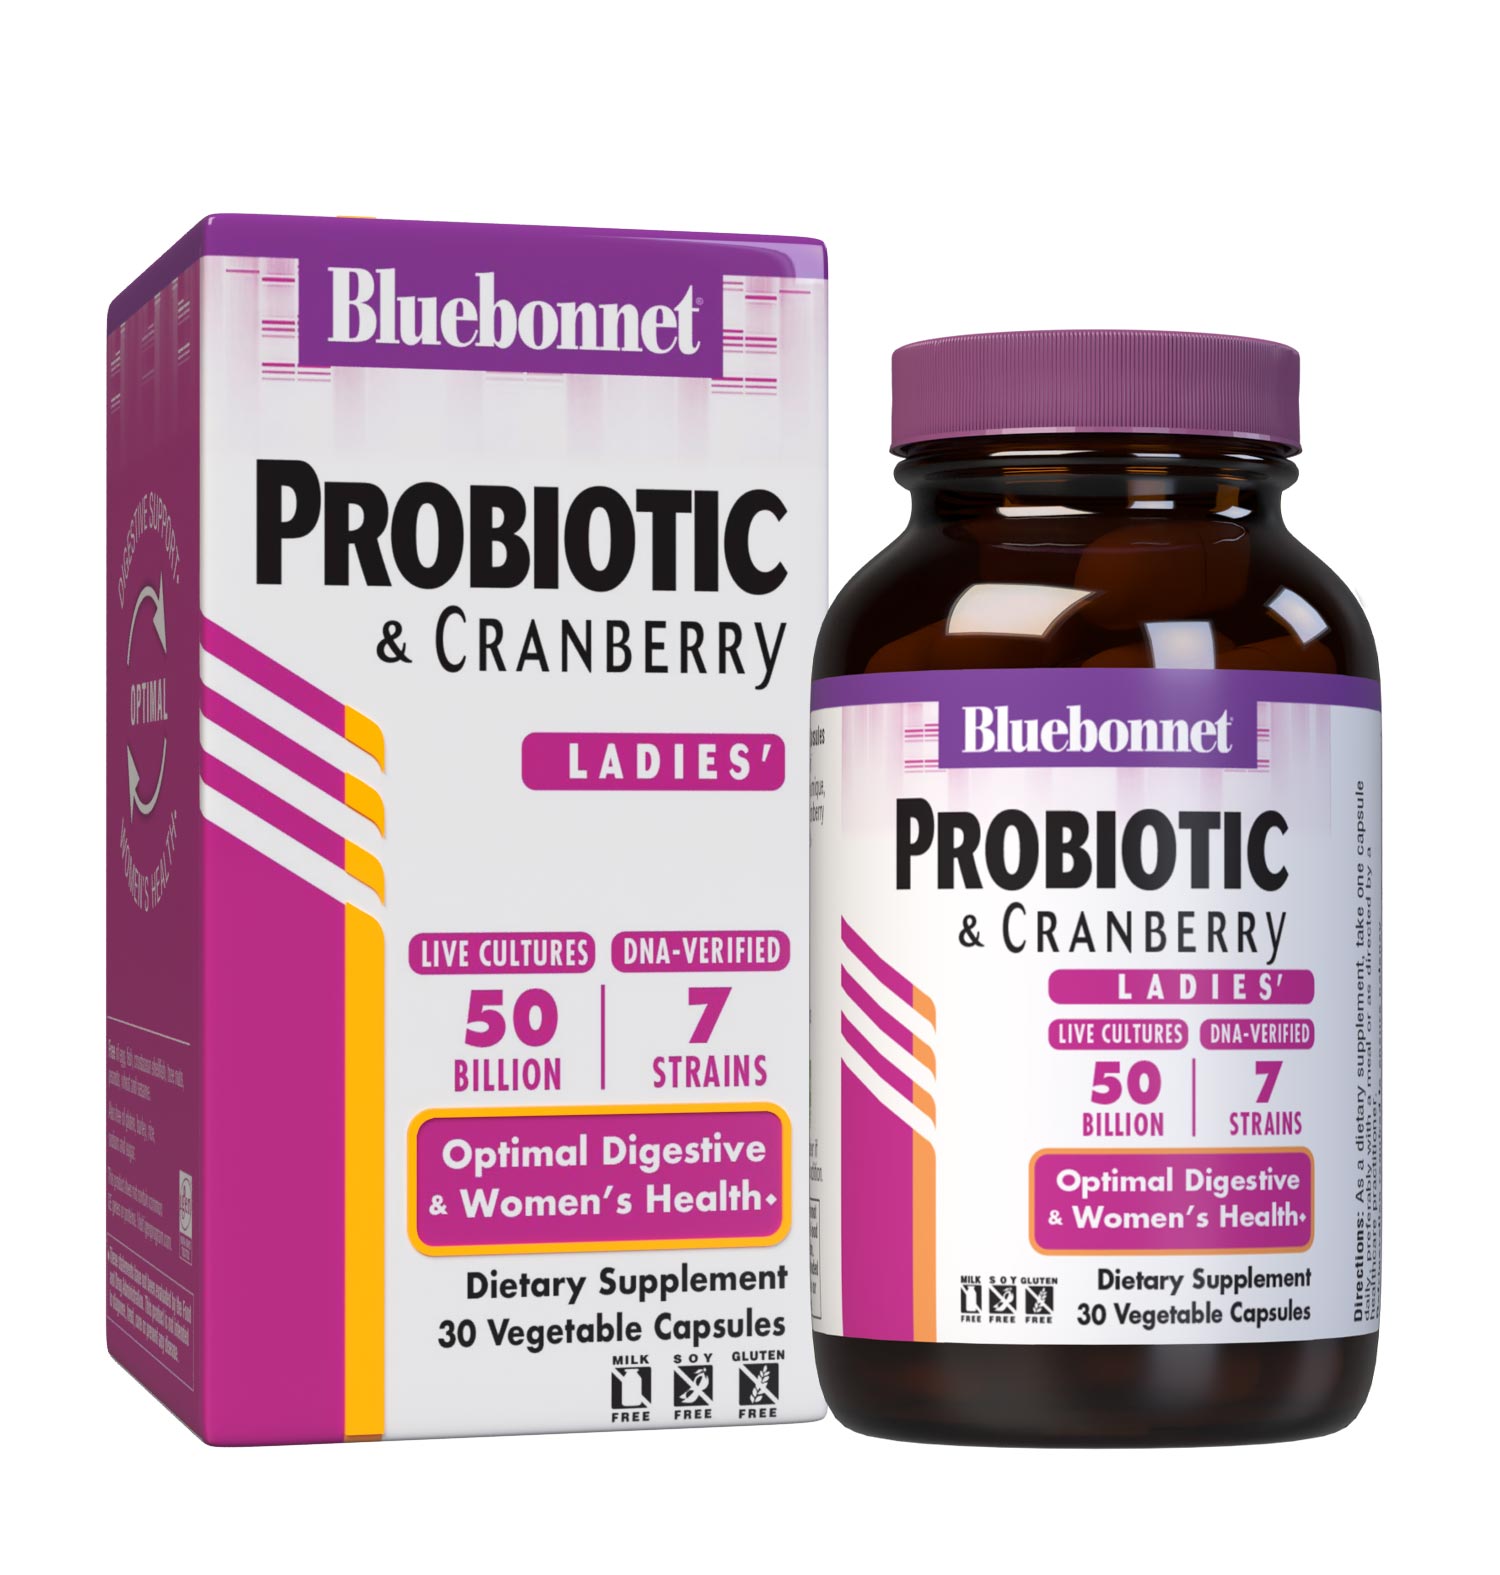 Bluebonnet’s Probiotic & Cranberry 30 Vegetable Capsules are formulated with 50 billion viable cultures from 7 DNA-verified, scientifically supported strains. This unique, science-based probiotic formula is infused with cranberry fruit extract to further nurture urinary tract health. Bottle with box. #size_30 count